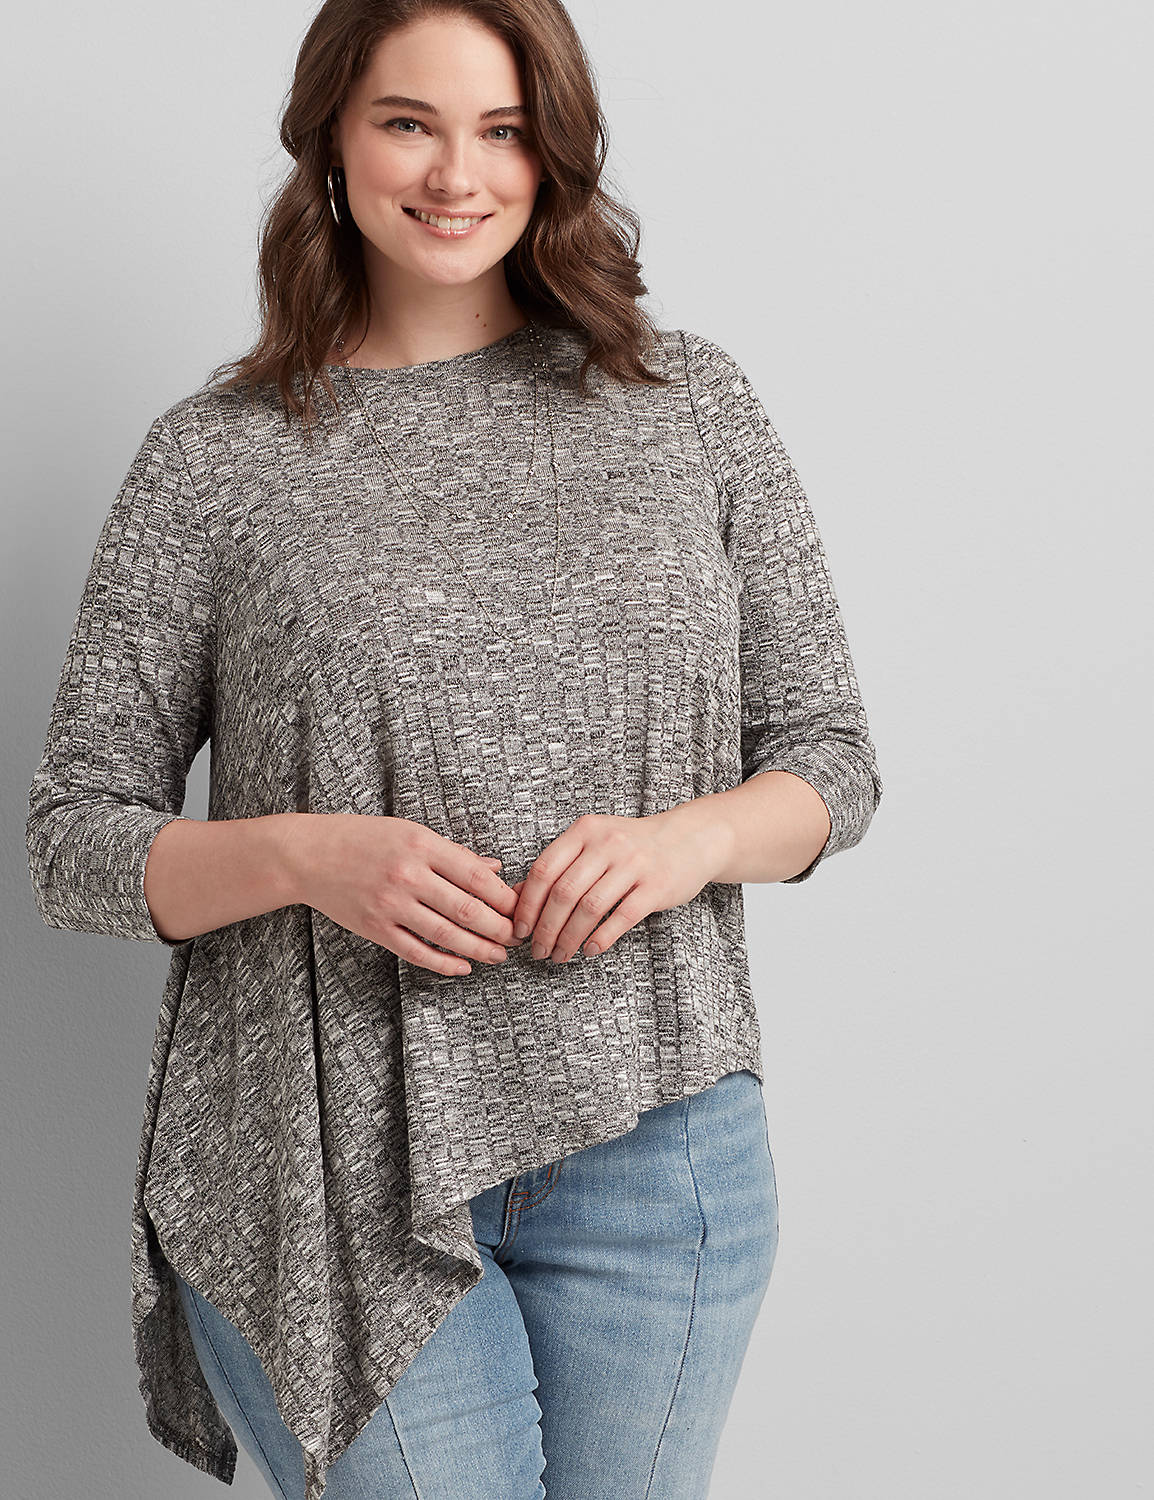 3/4 Sleeve Crew Neck Draped Asym Hacci Rib Top 1113987:Med Grey Heather:18/20 Product Image 1